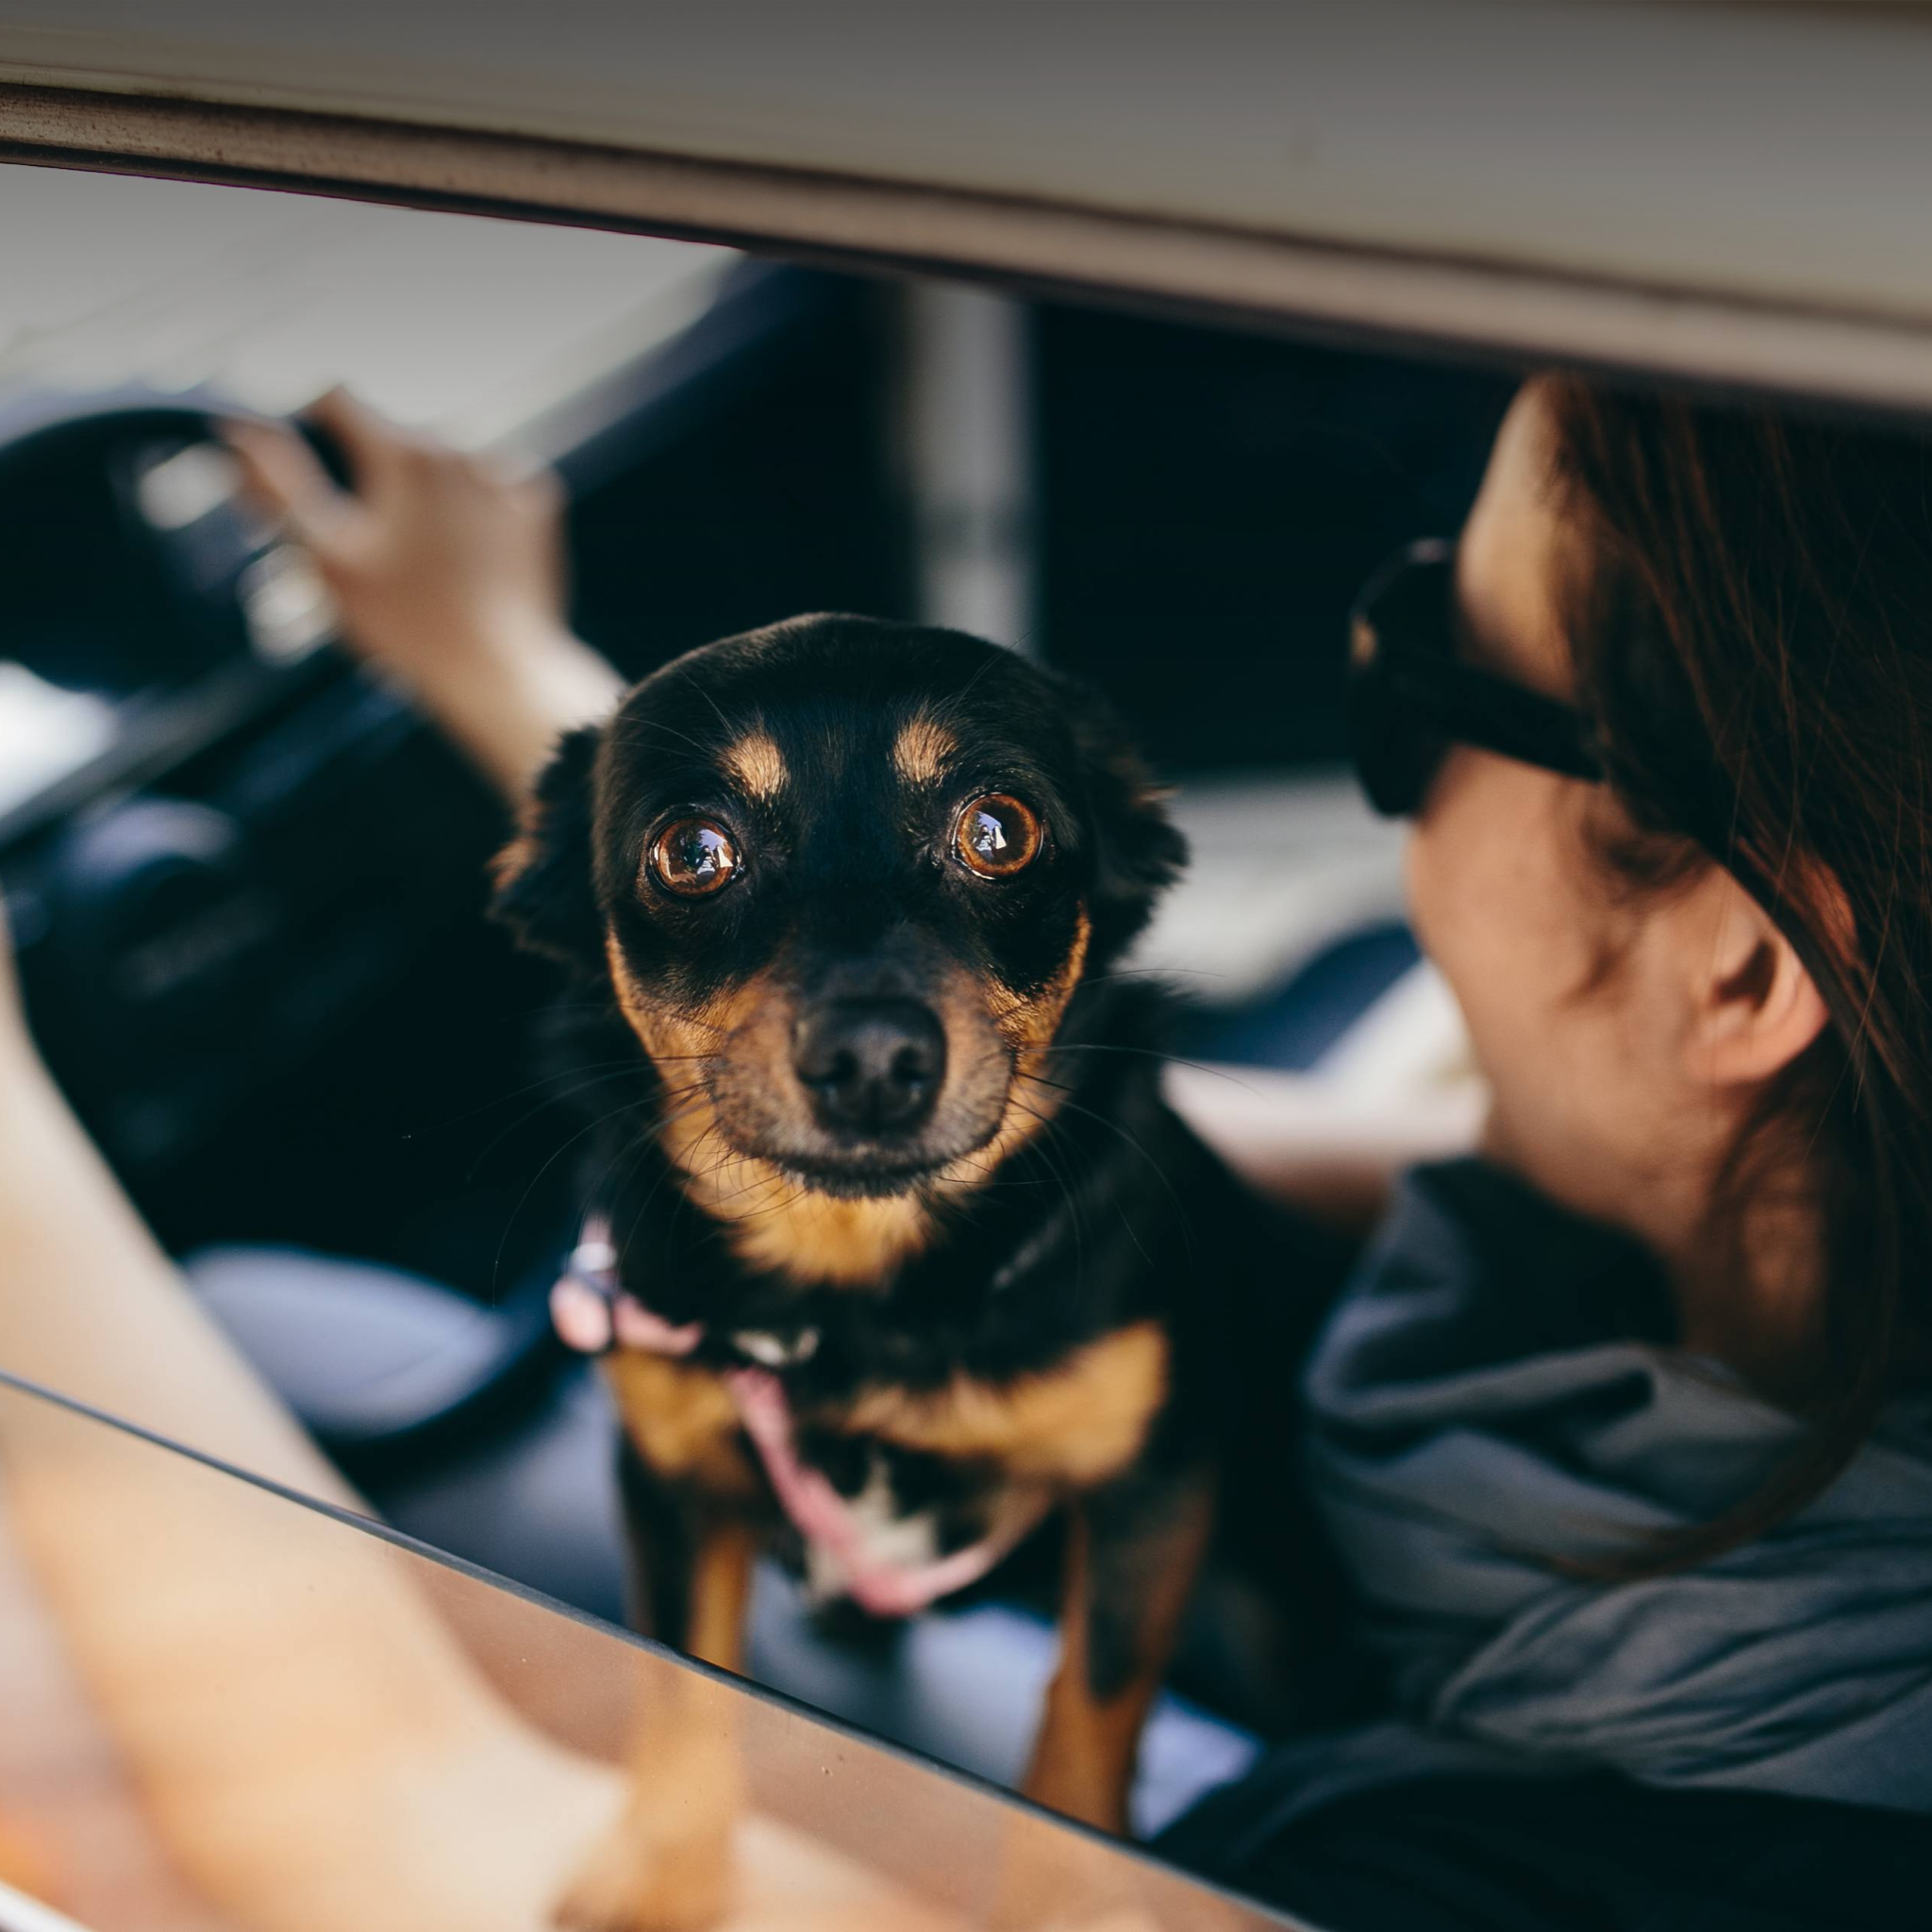 A small dog sits comfortably in its owners arms while looking out of a car window